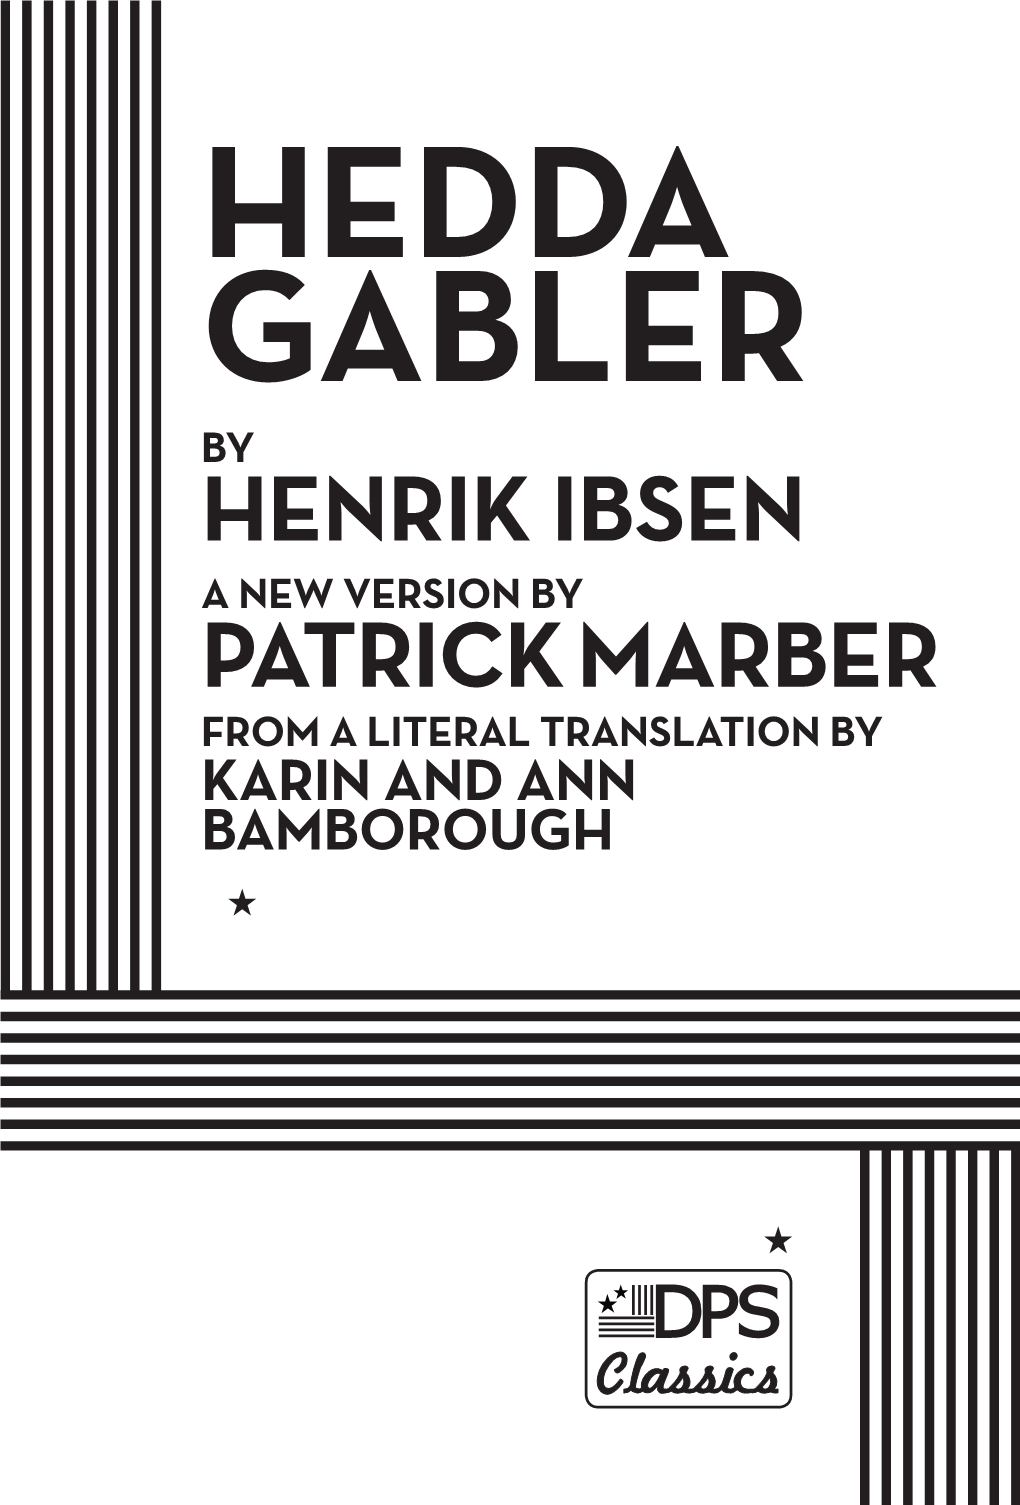 Hedda Gabler by Henrik Ibsen a New Version by Patrick Marber from a Literal Translation by Karin and Ann Bamborough